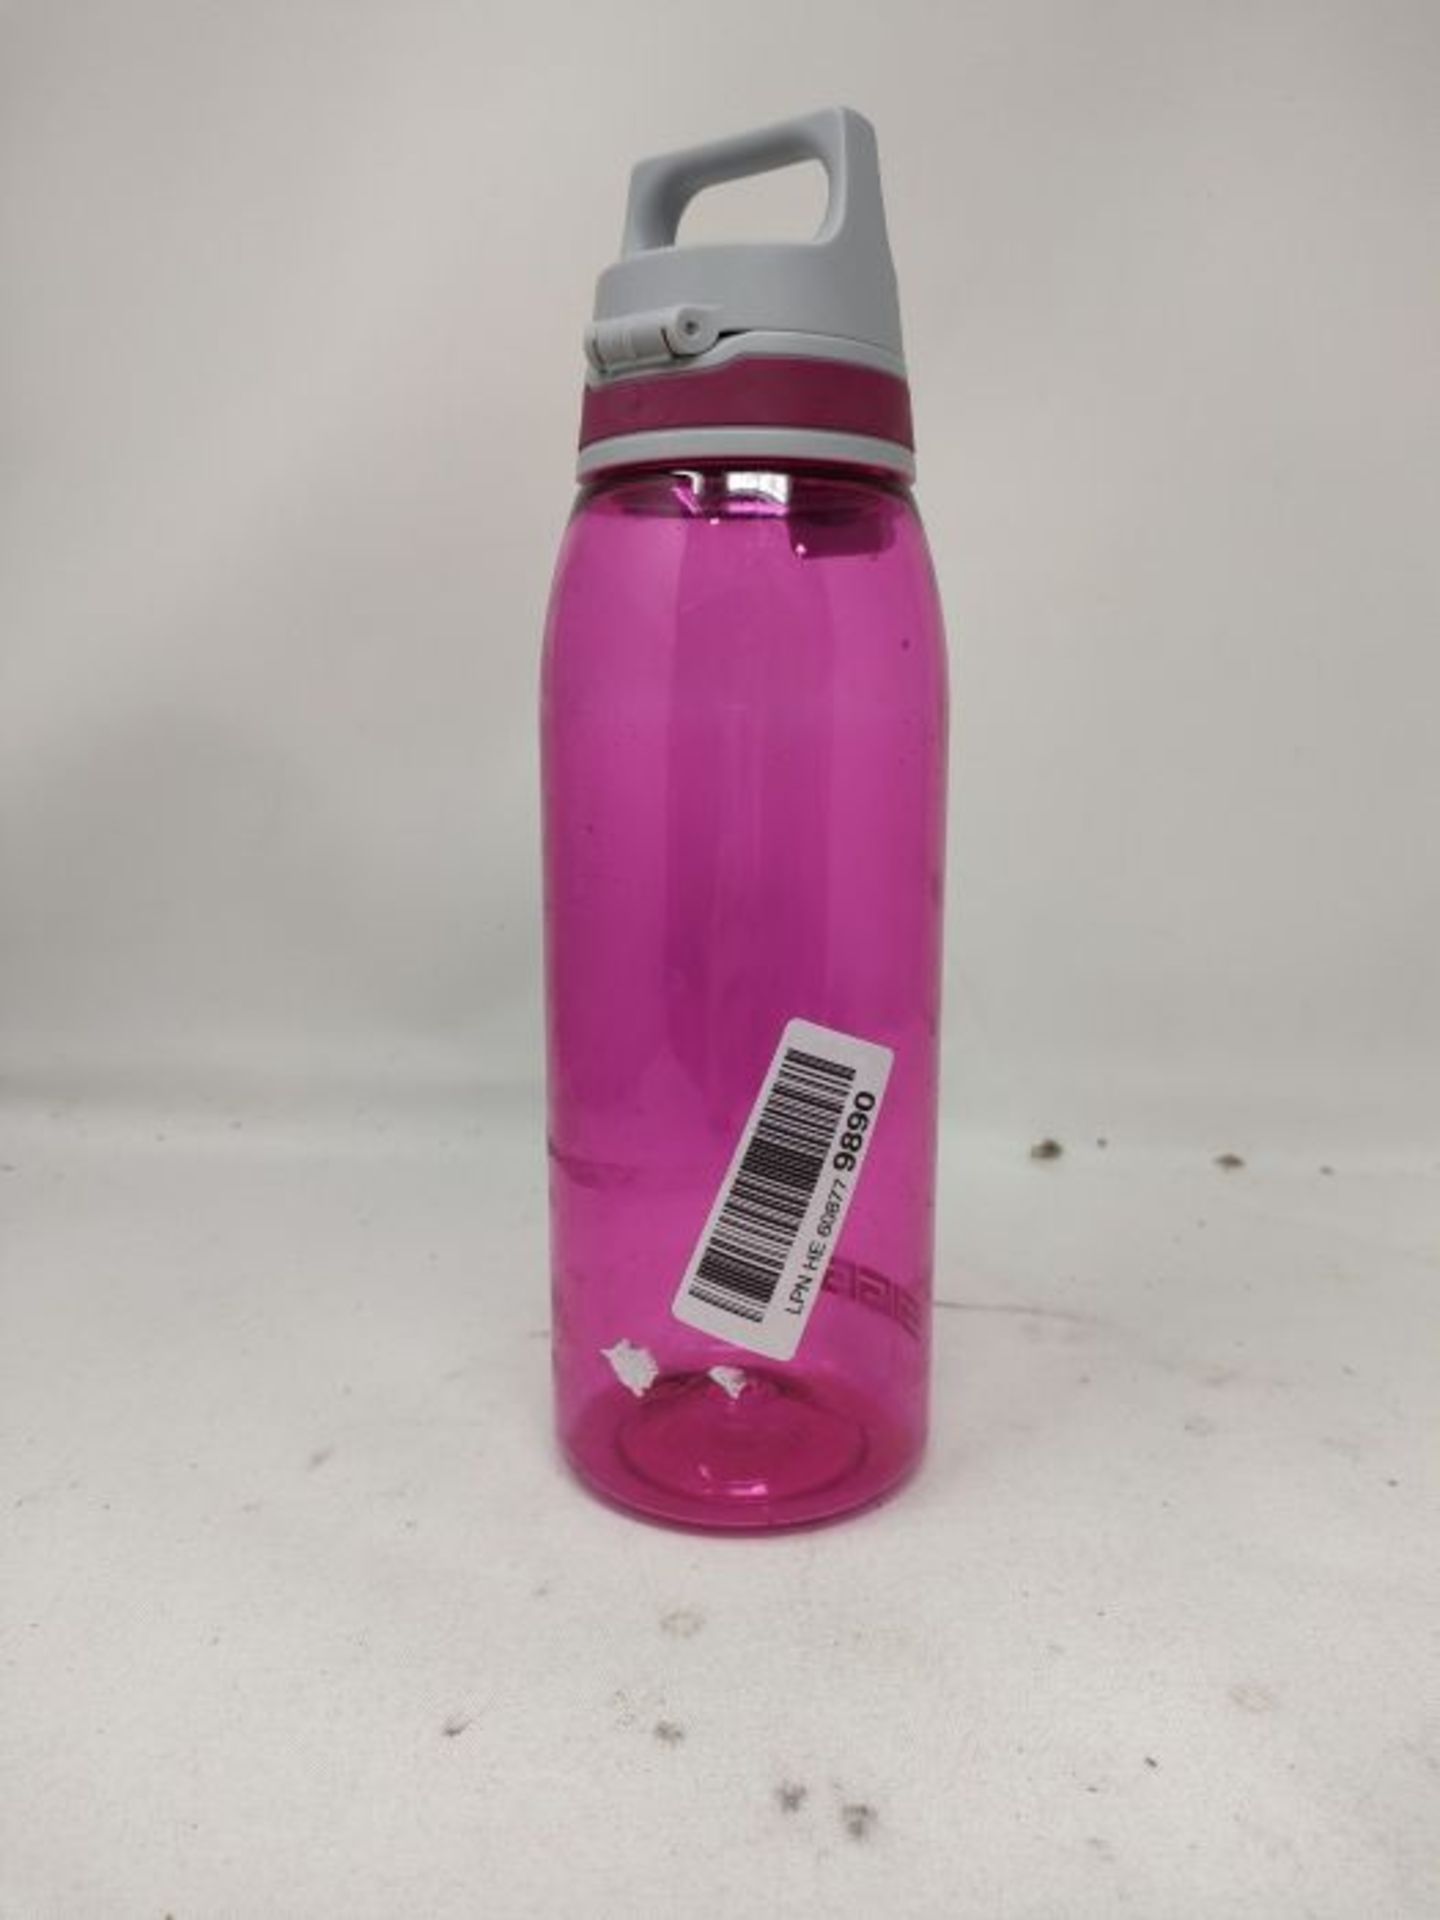 SIGG Total Colour Berry Water Bottle (1 L), BPA-Free Drinks Bottle Crafted from Tritan - Image 2 of 2